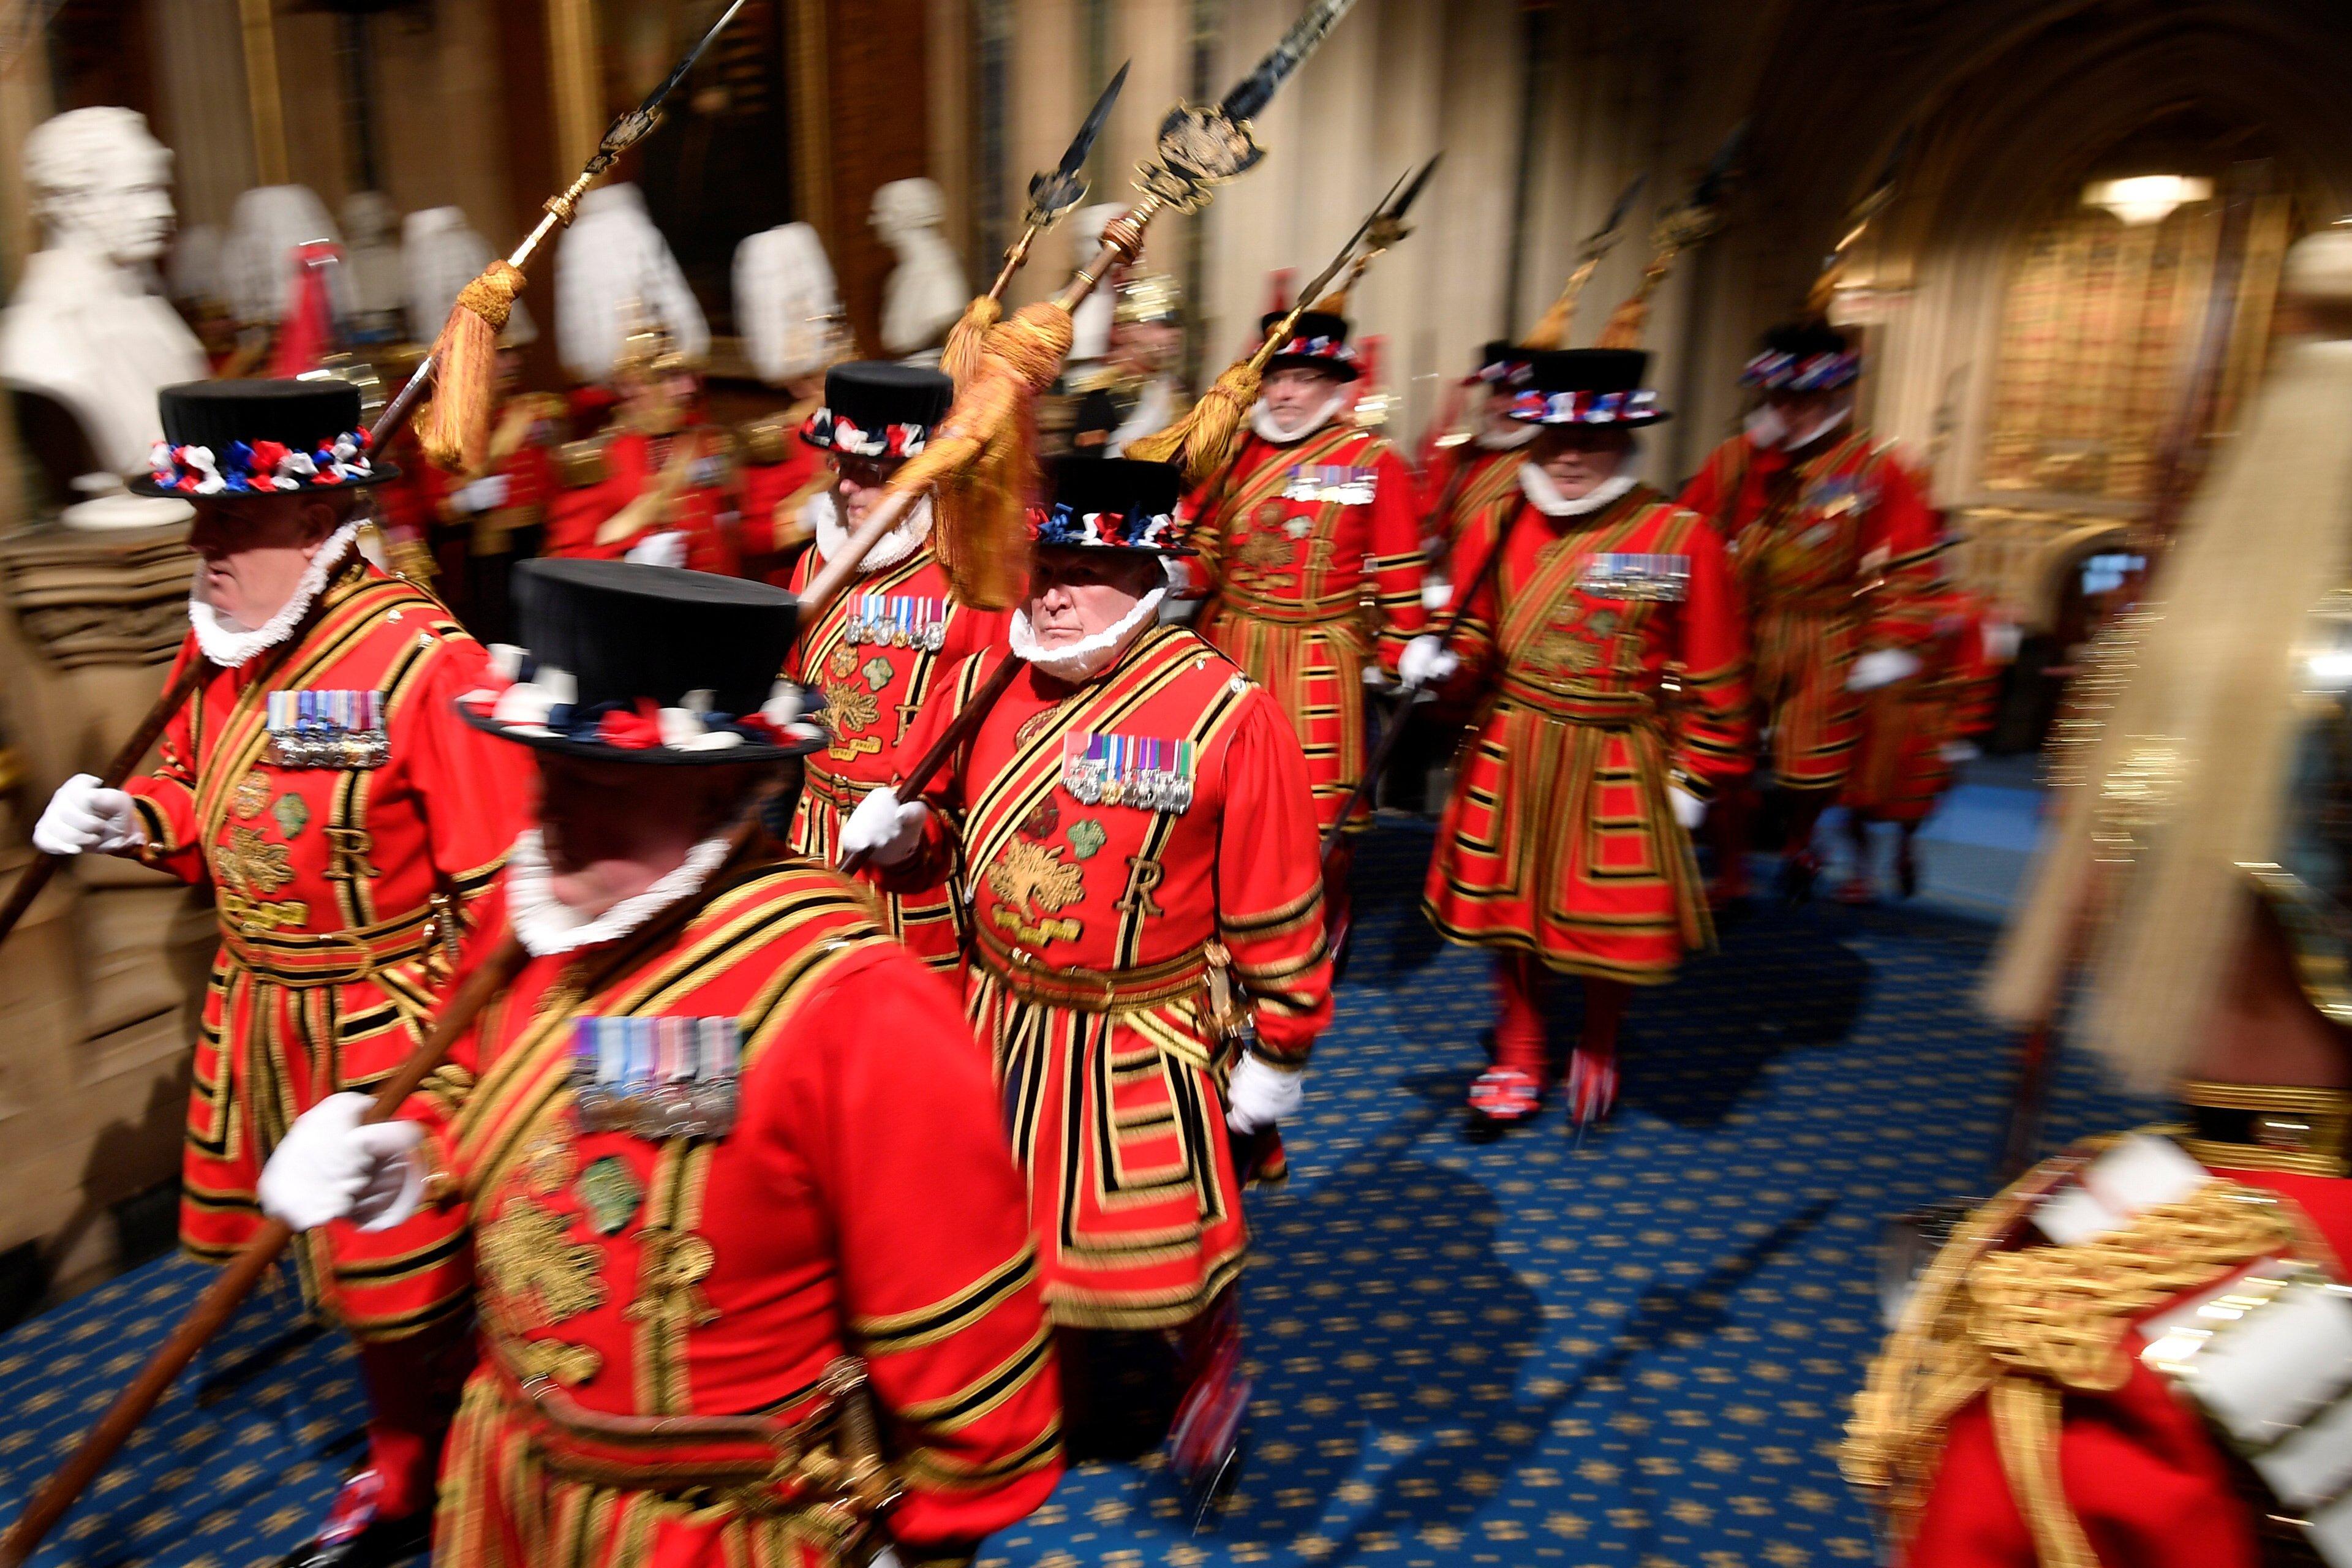 Yeoman warders parade through the Sovereign's entrance ahead of the State Opening of Parliament by Queen Elizabeth II, in the House of Lords at the Palace of Westminster in London.